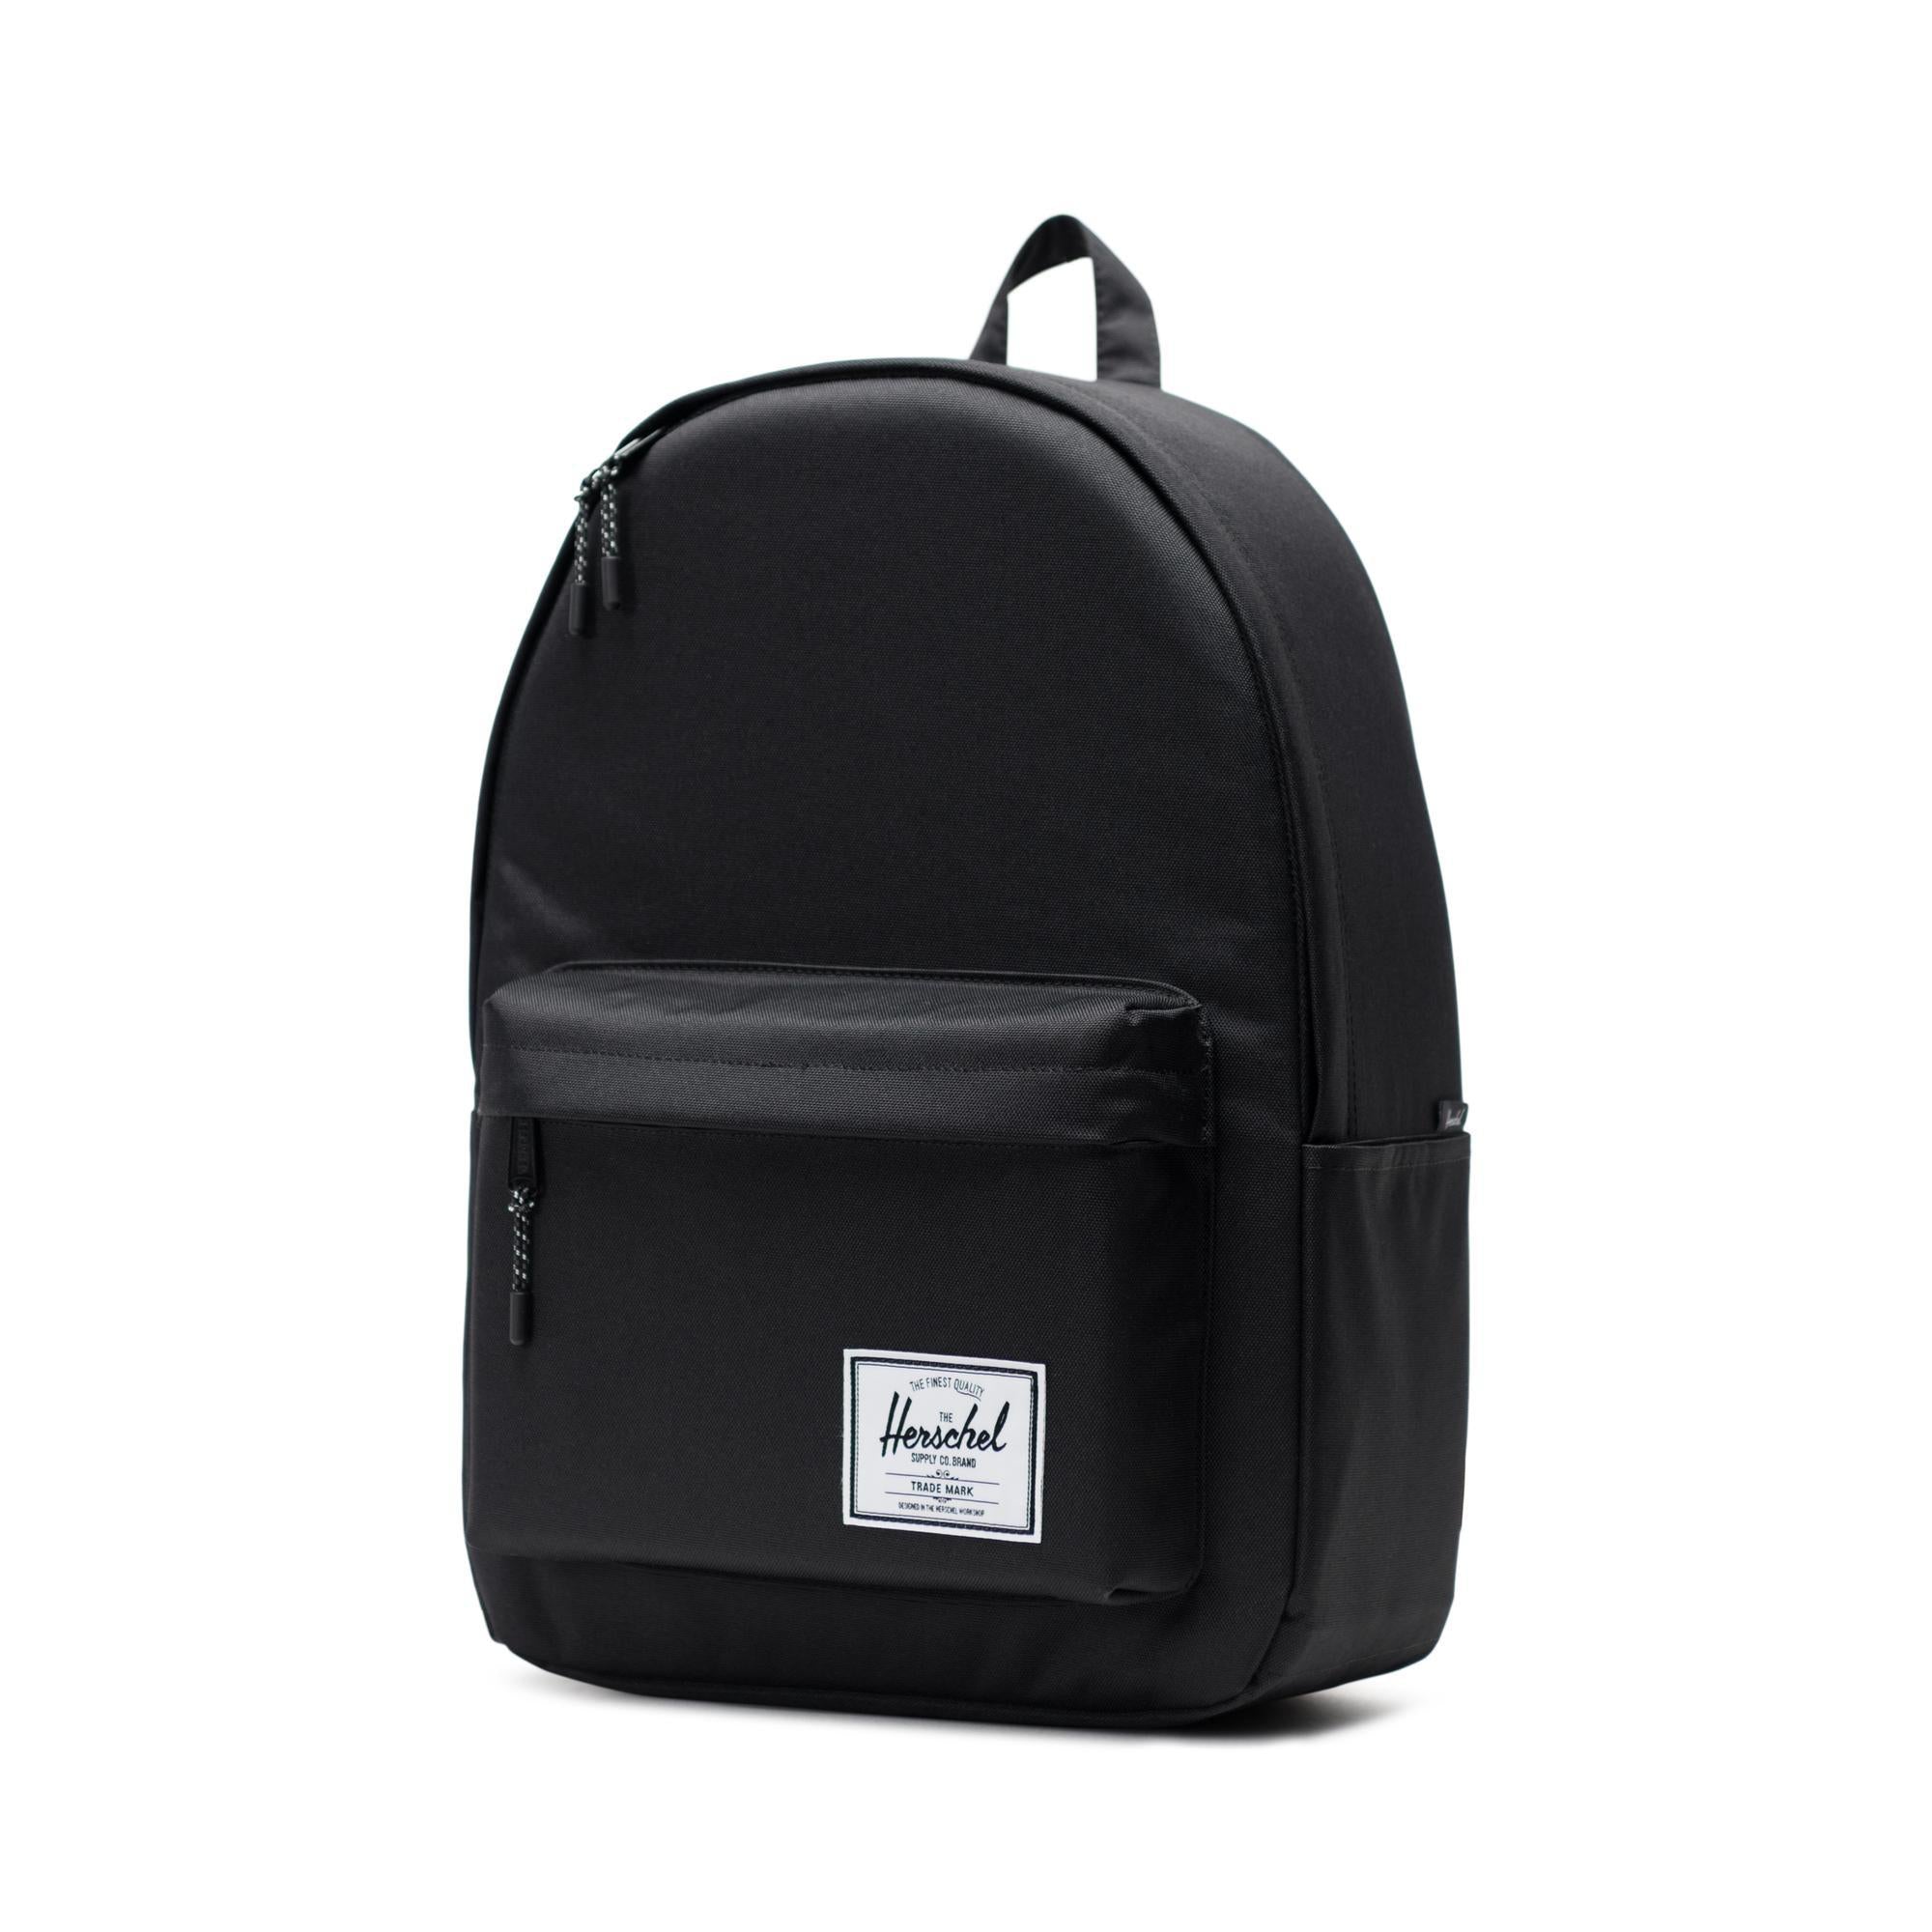 Herschel Classic XL Backpack: Everyday design for everyone